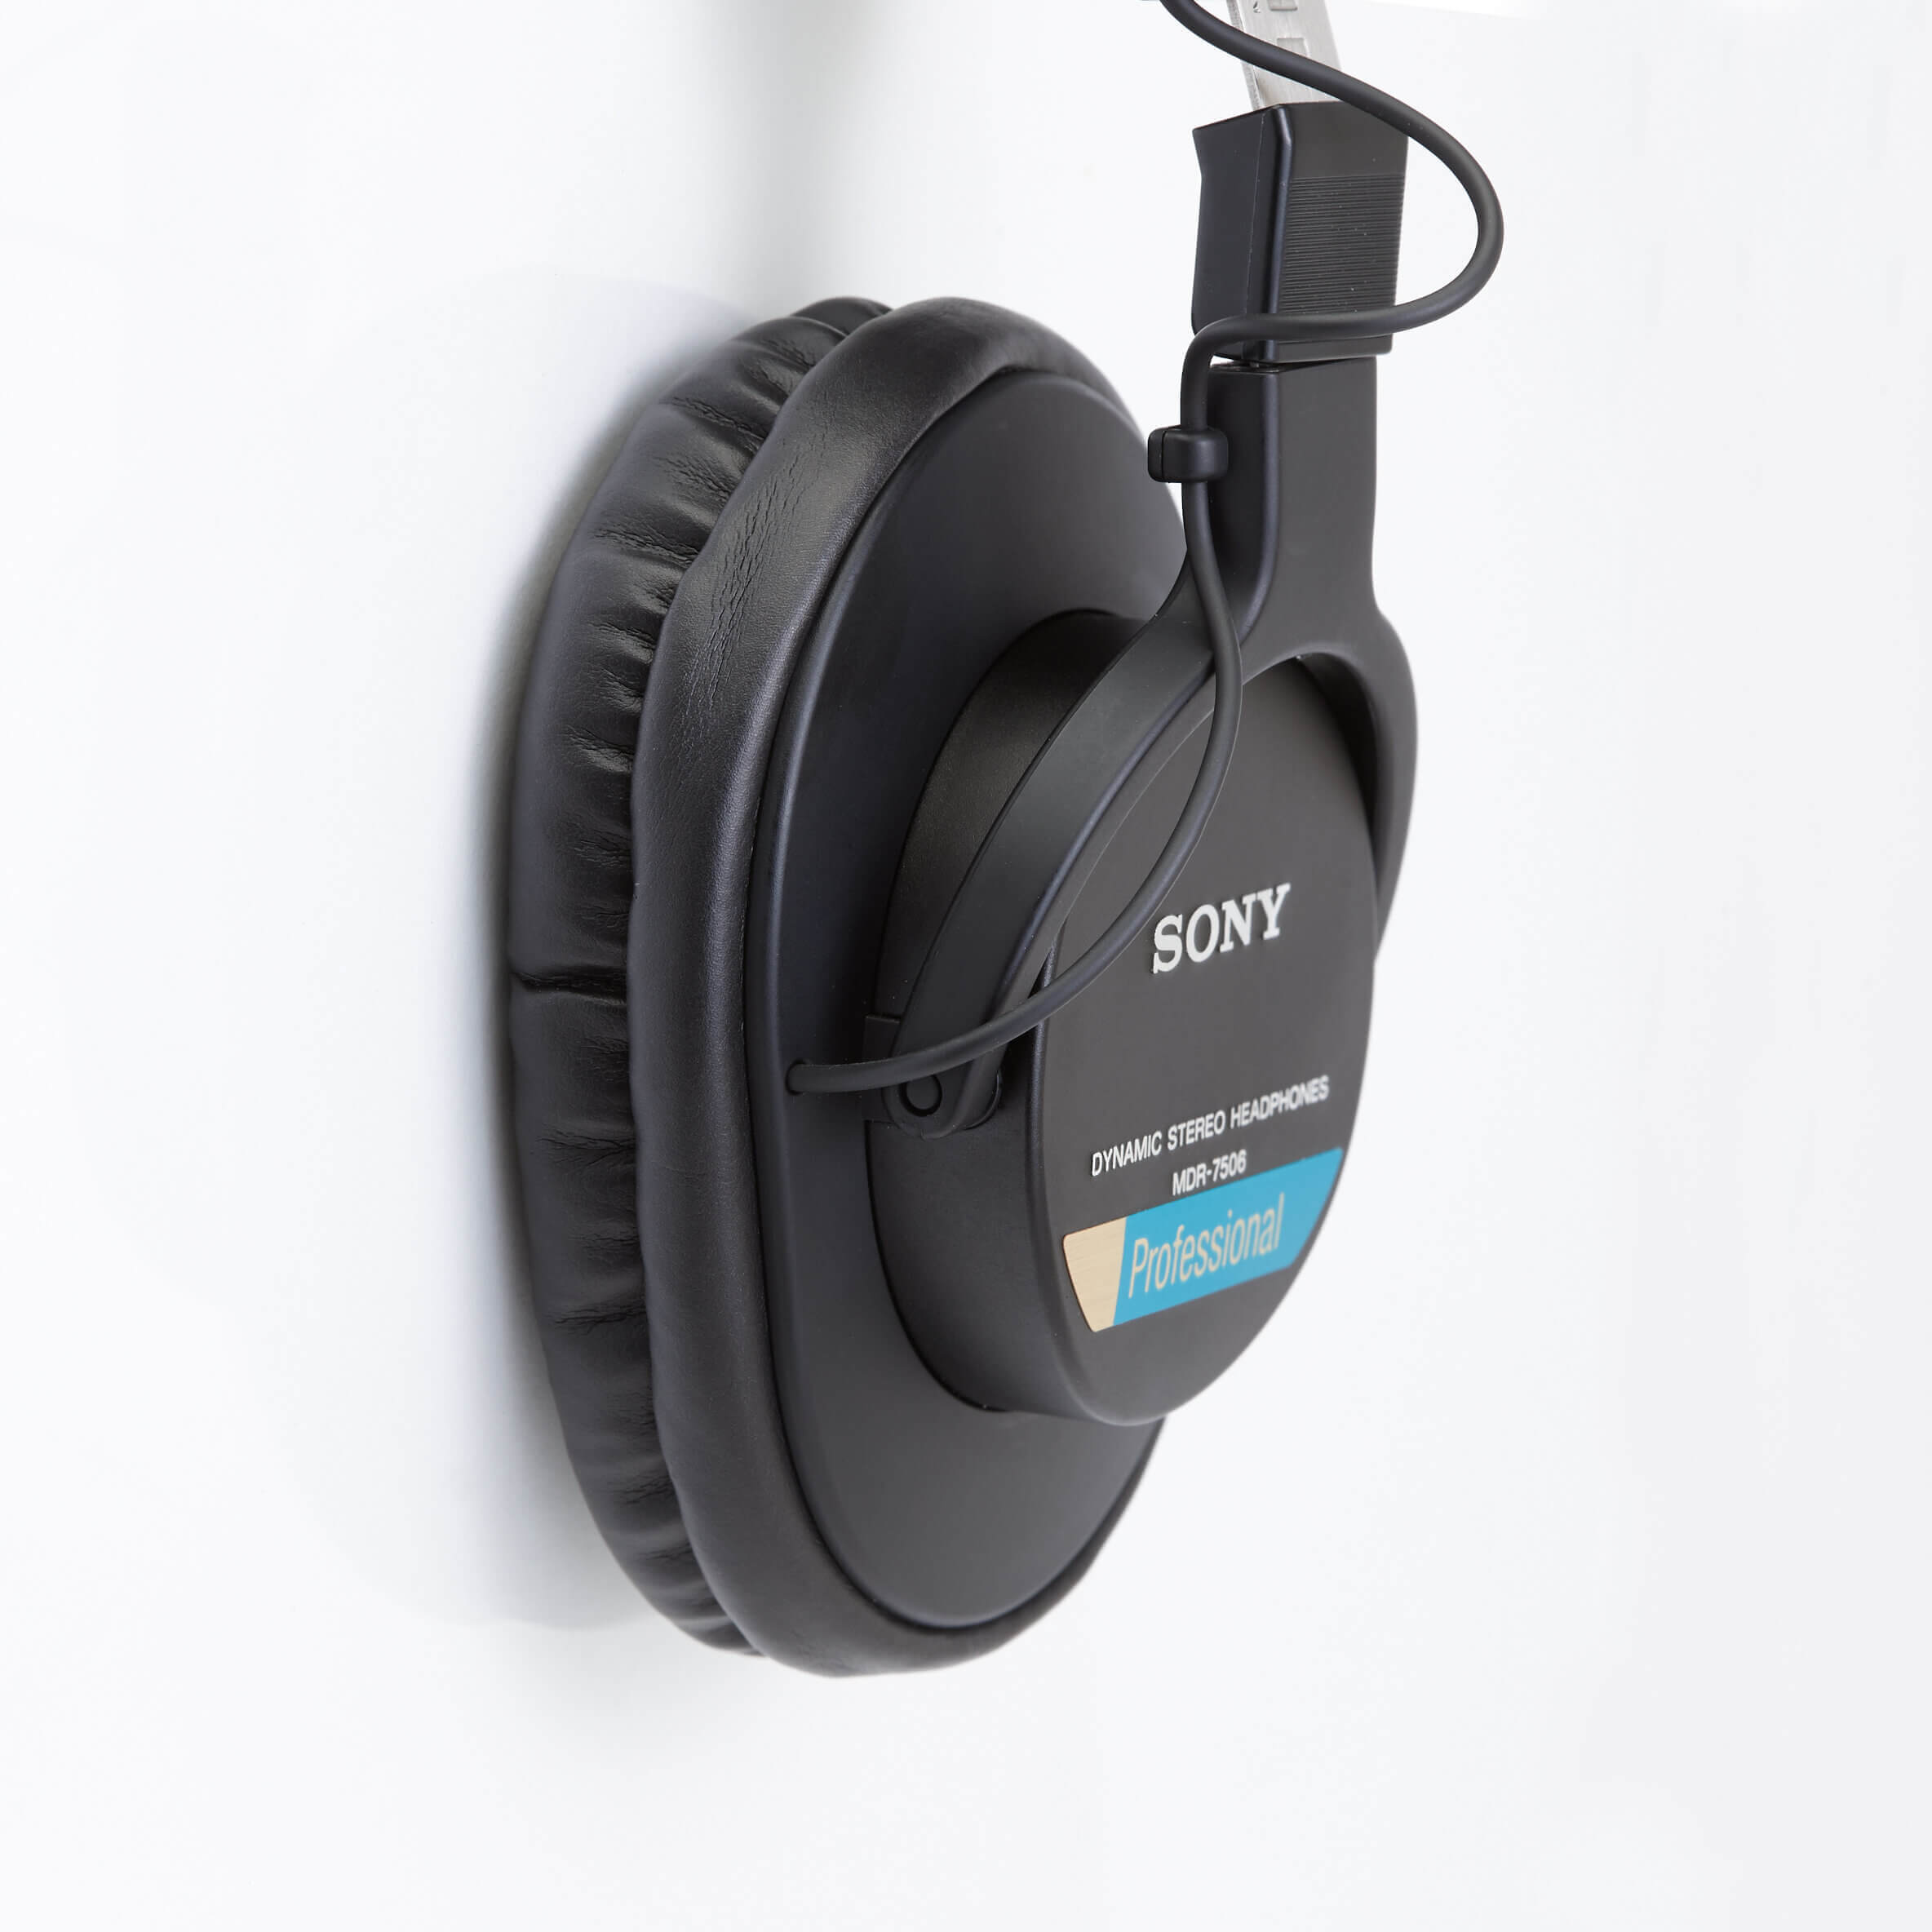 Replacement Ear Pads for the Sony MDR-7506 Headphones - Standard Series